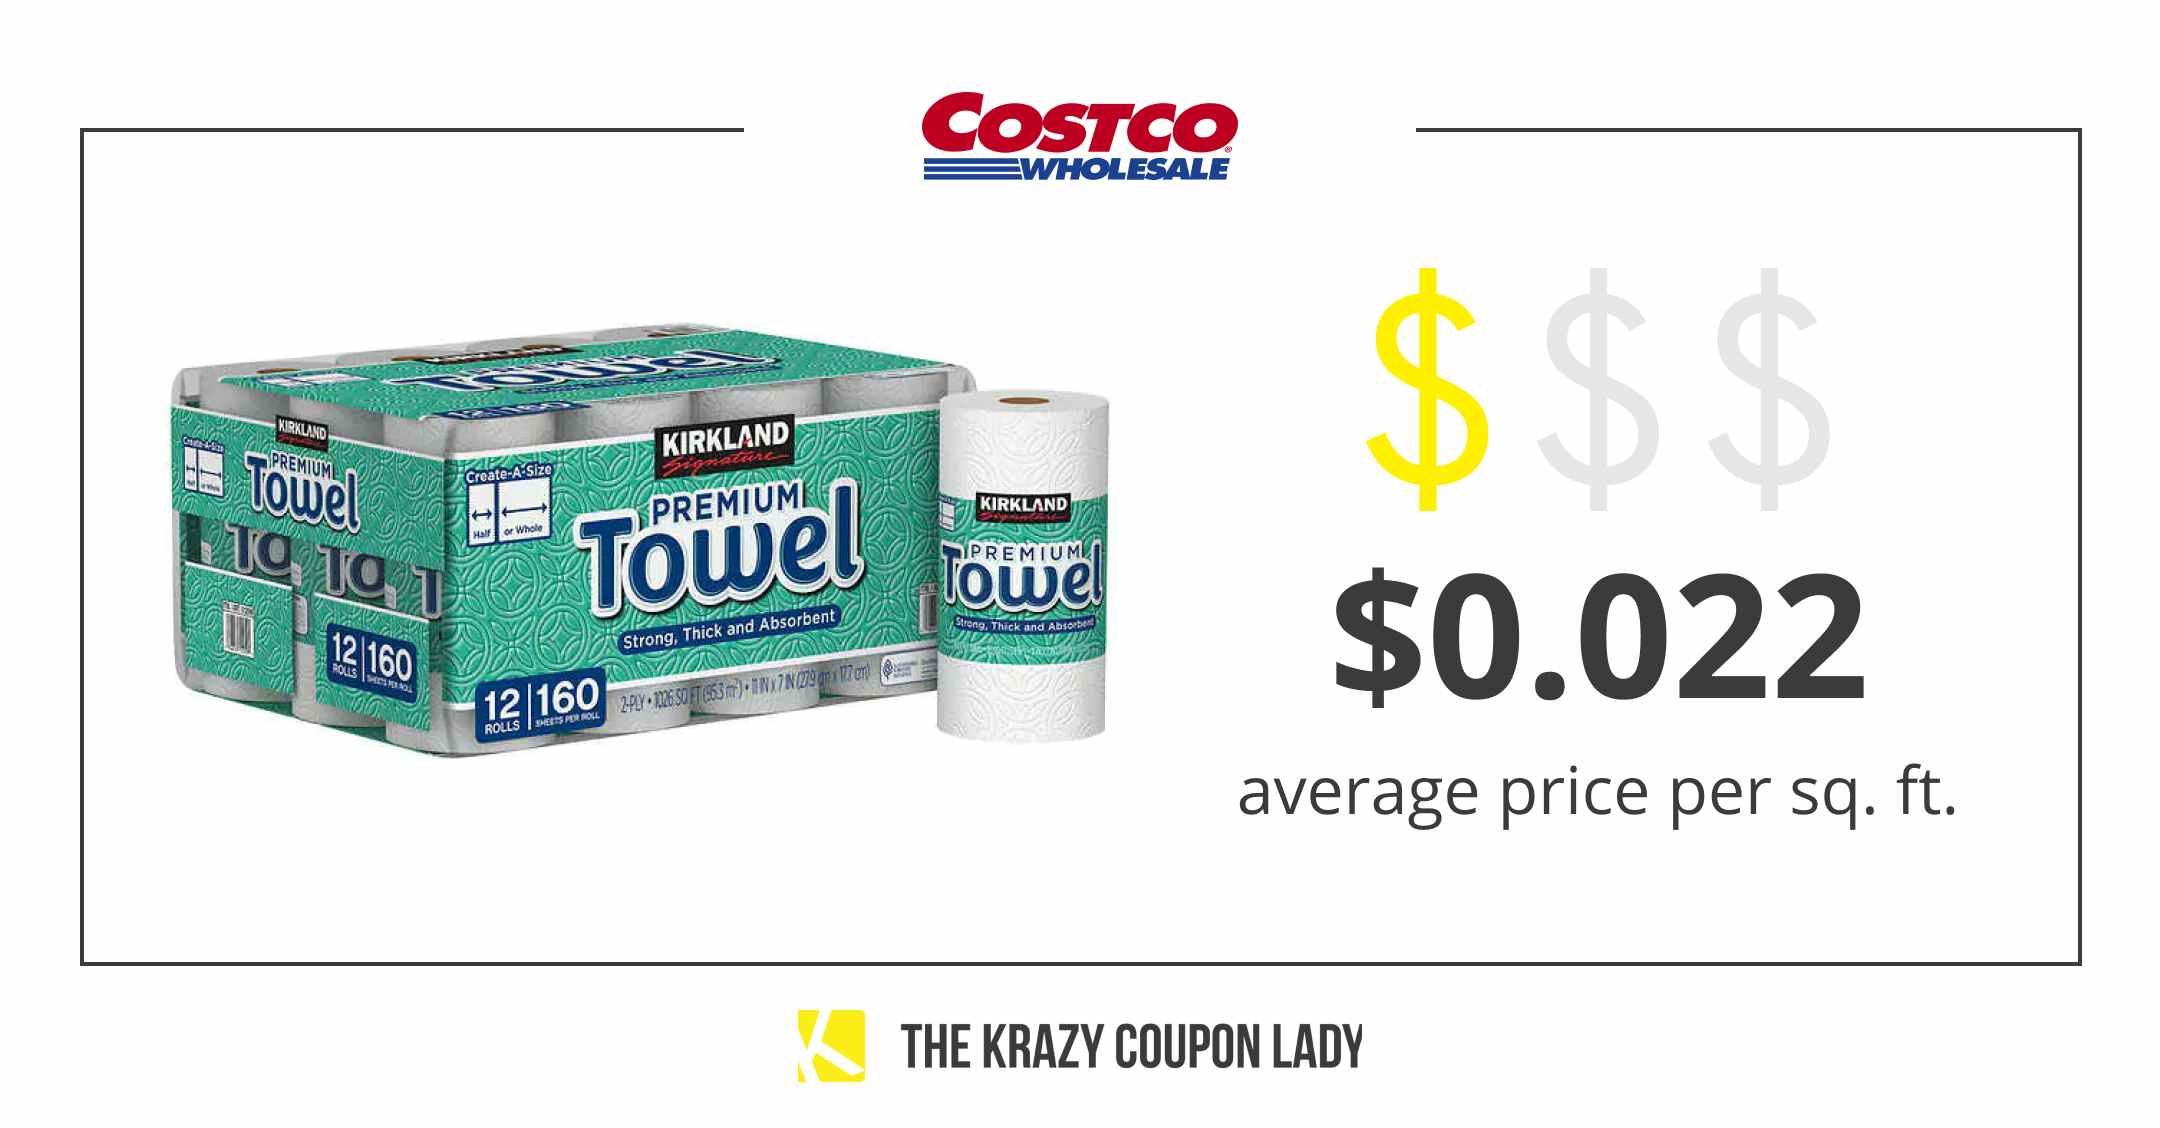 Get Cheapest Paper Towels Costco Price Square Foot Graphic 1673982986 1673982986 ?auto=format&fit=fill&q=25